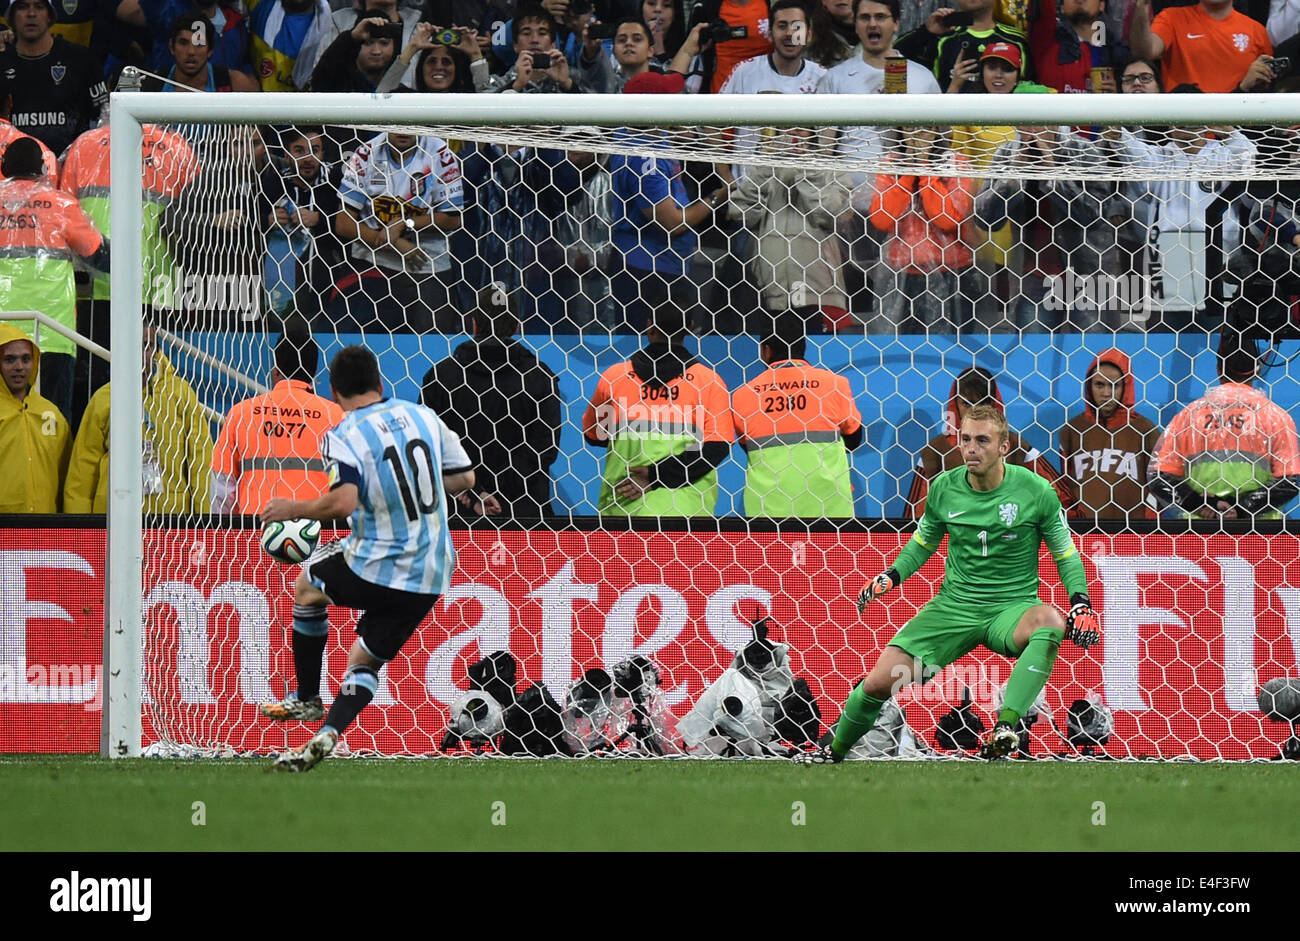 Sao Paulo, Brazil. 09th July, 2014. Argentina's Lionel Messi (L) scores the 0-1 goal during the penalty shoot-out against goalkeeper Jasper Cillessen of the Netherlands during the FIFA World Cup 2014 semi-final soccer match between the Netherlands and Argentina at the Arena Corinthians in Sao Paulo, Brazil, 09 July 2014. Photo: Marius Becker/dpa/Alamy Live News Stock Photo